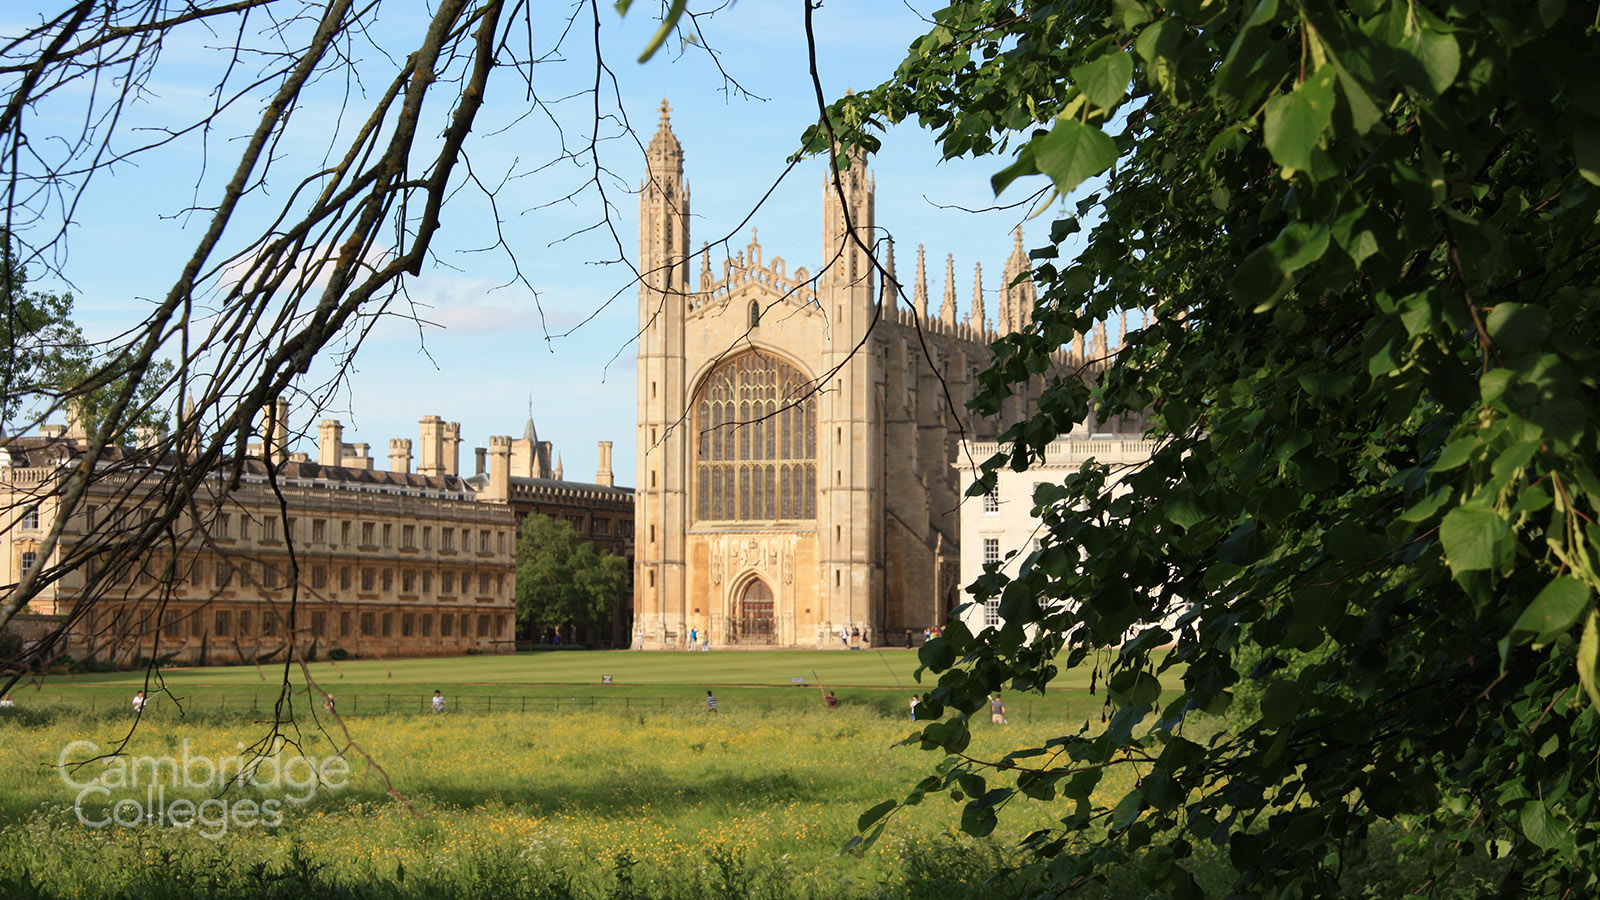 A view of King's college chapel from the Cambridge backs